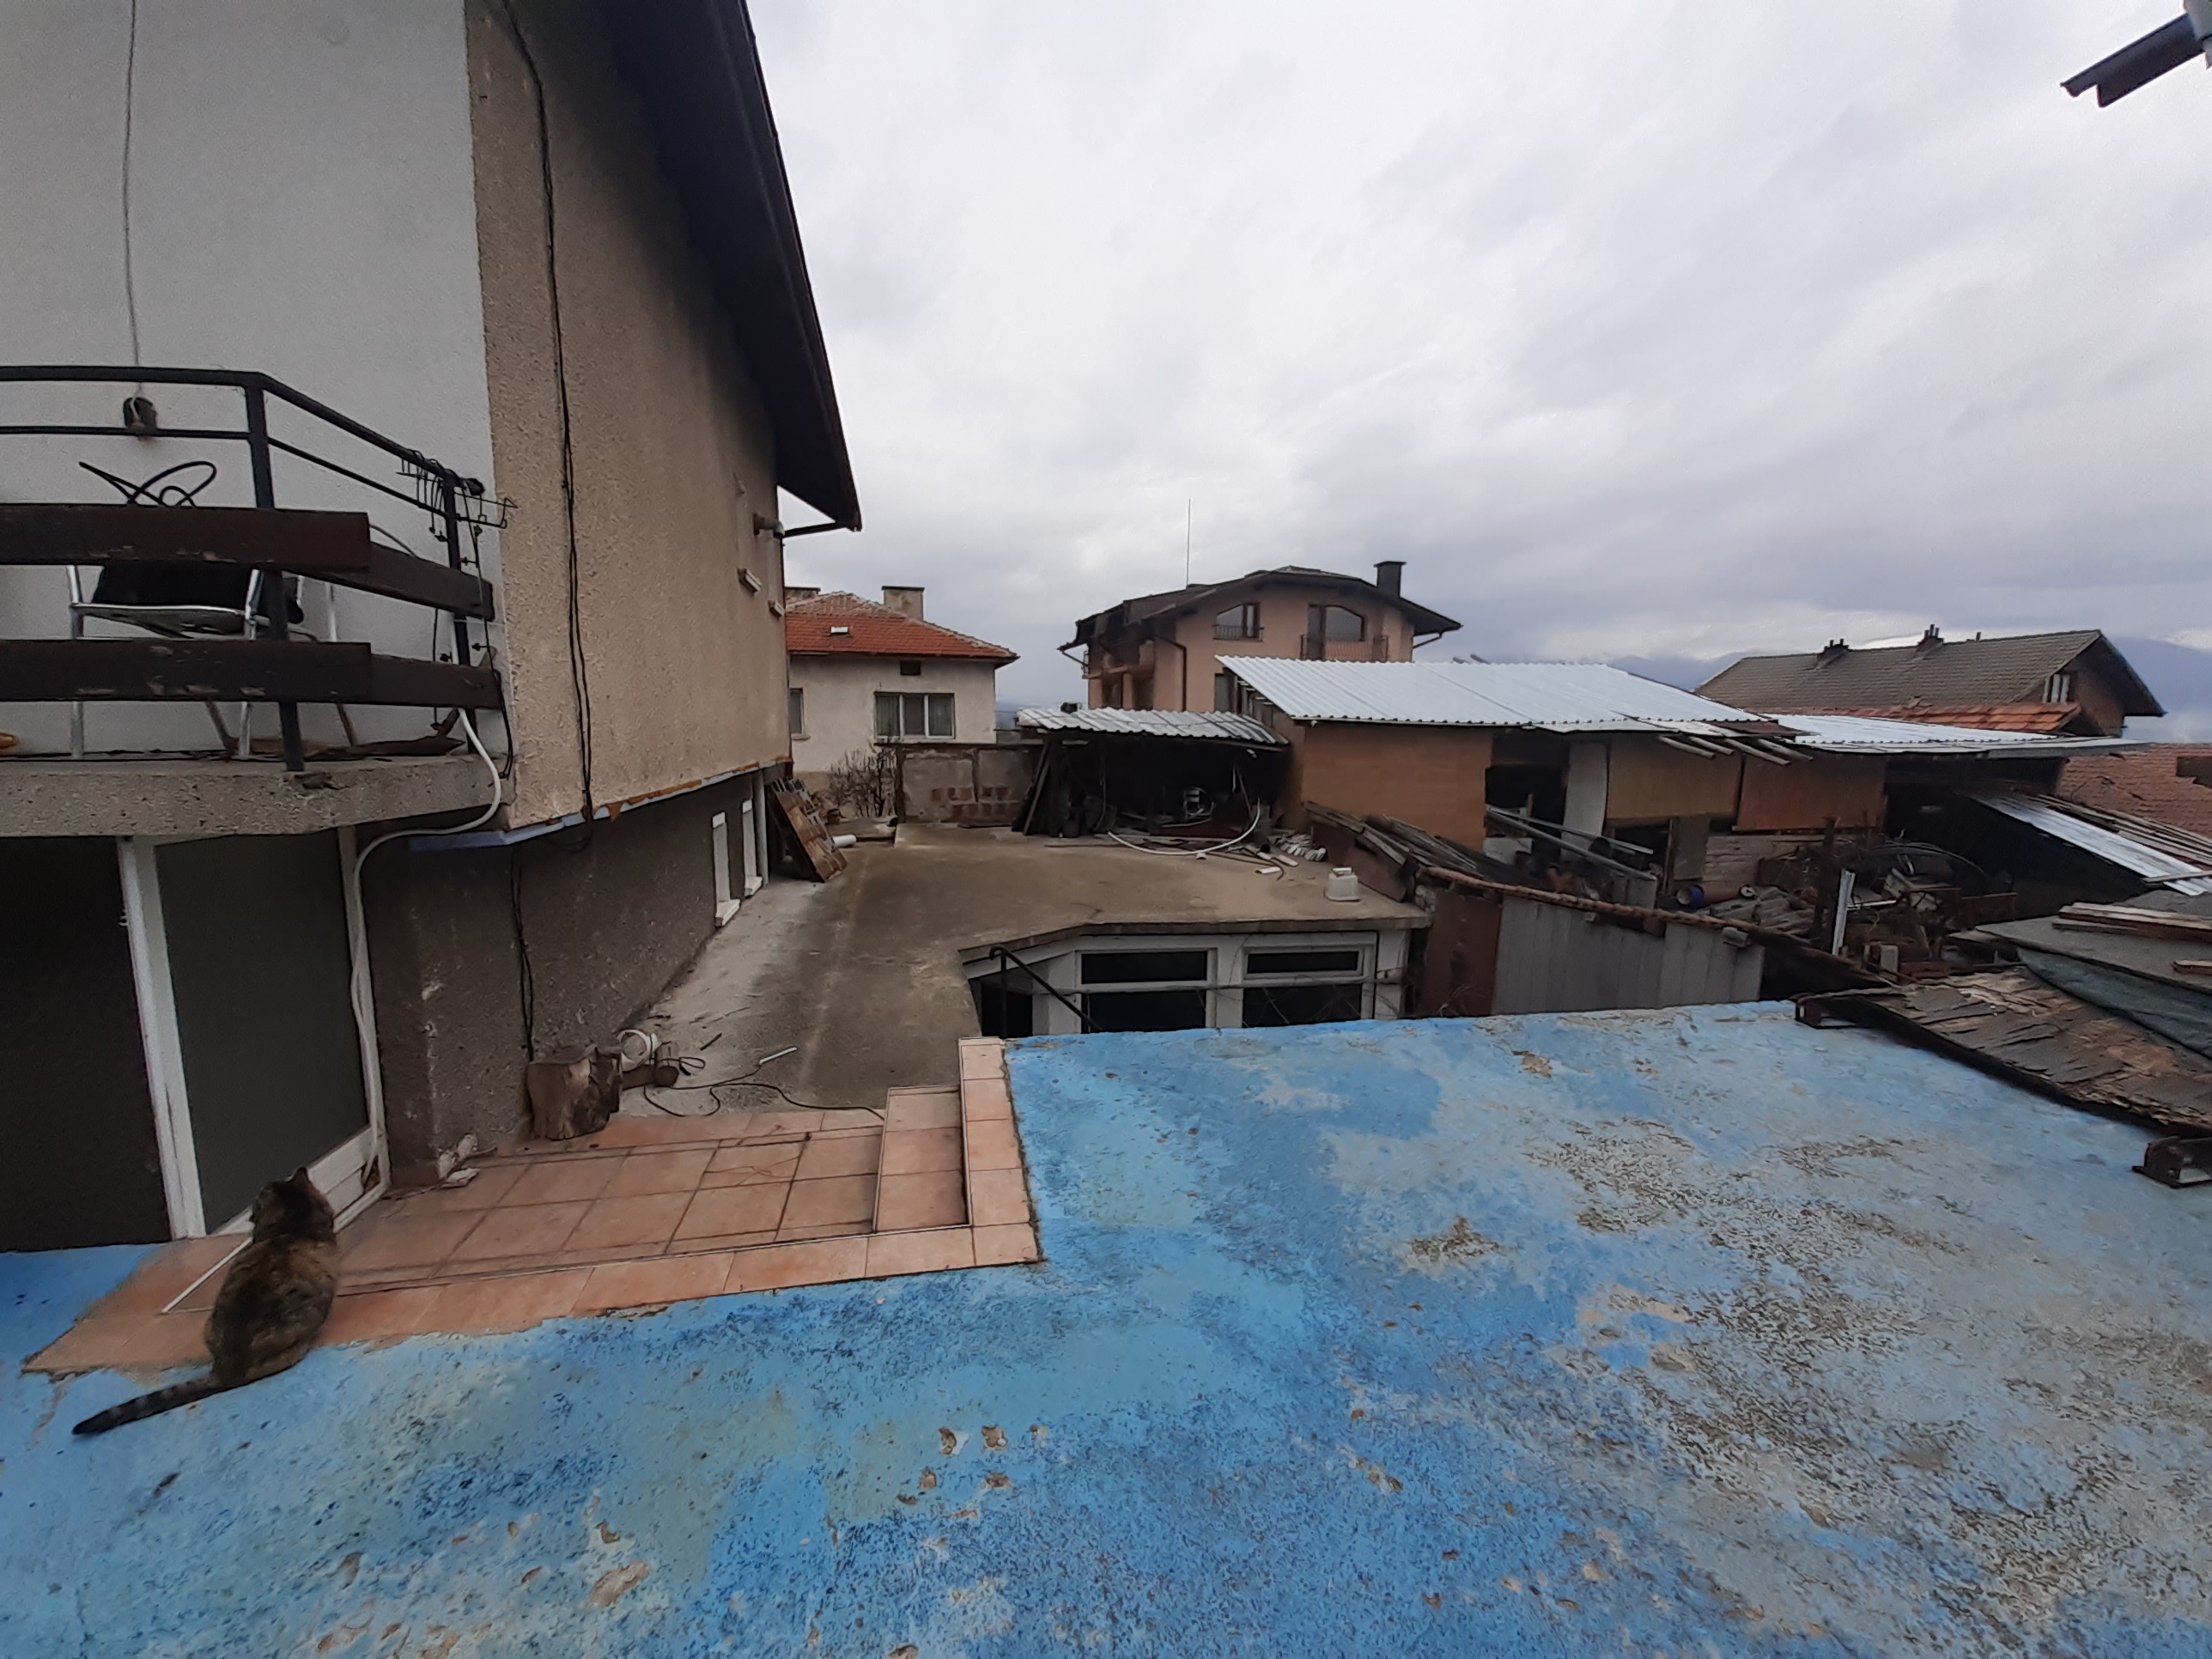 For sale in Bansko: Gasified massive three-story house with commercial premises